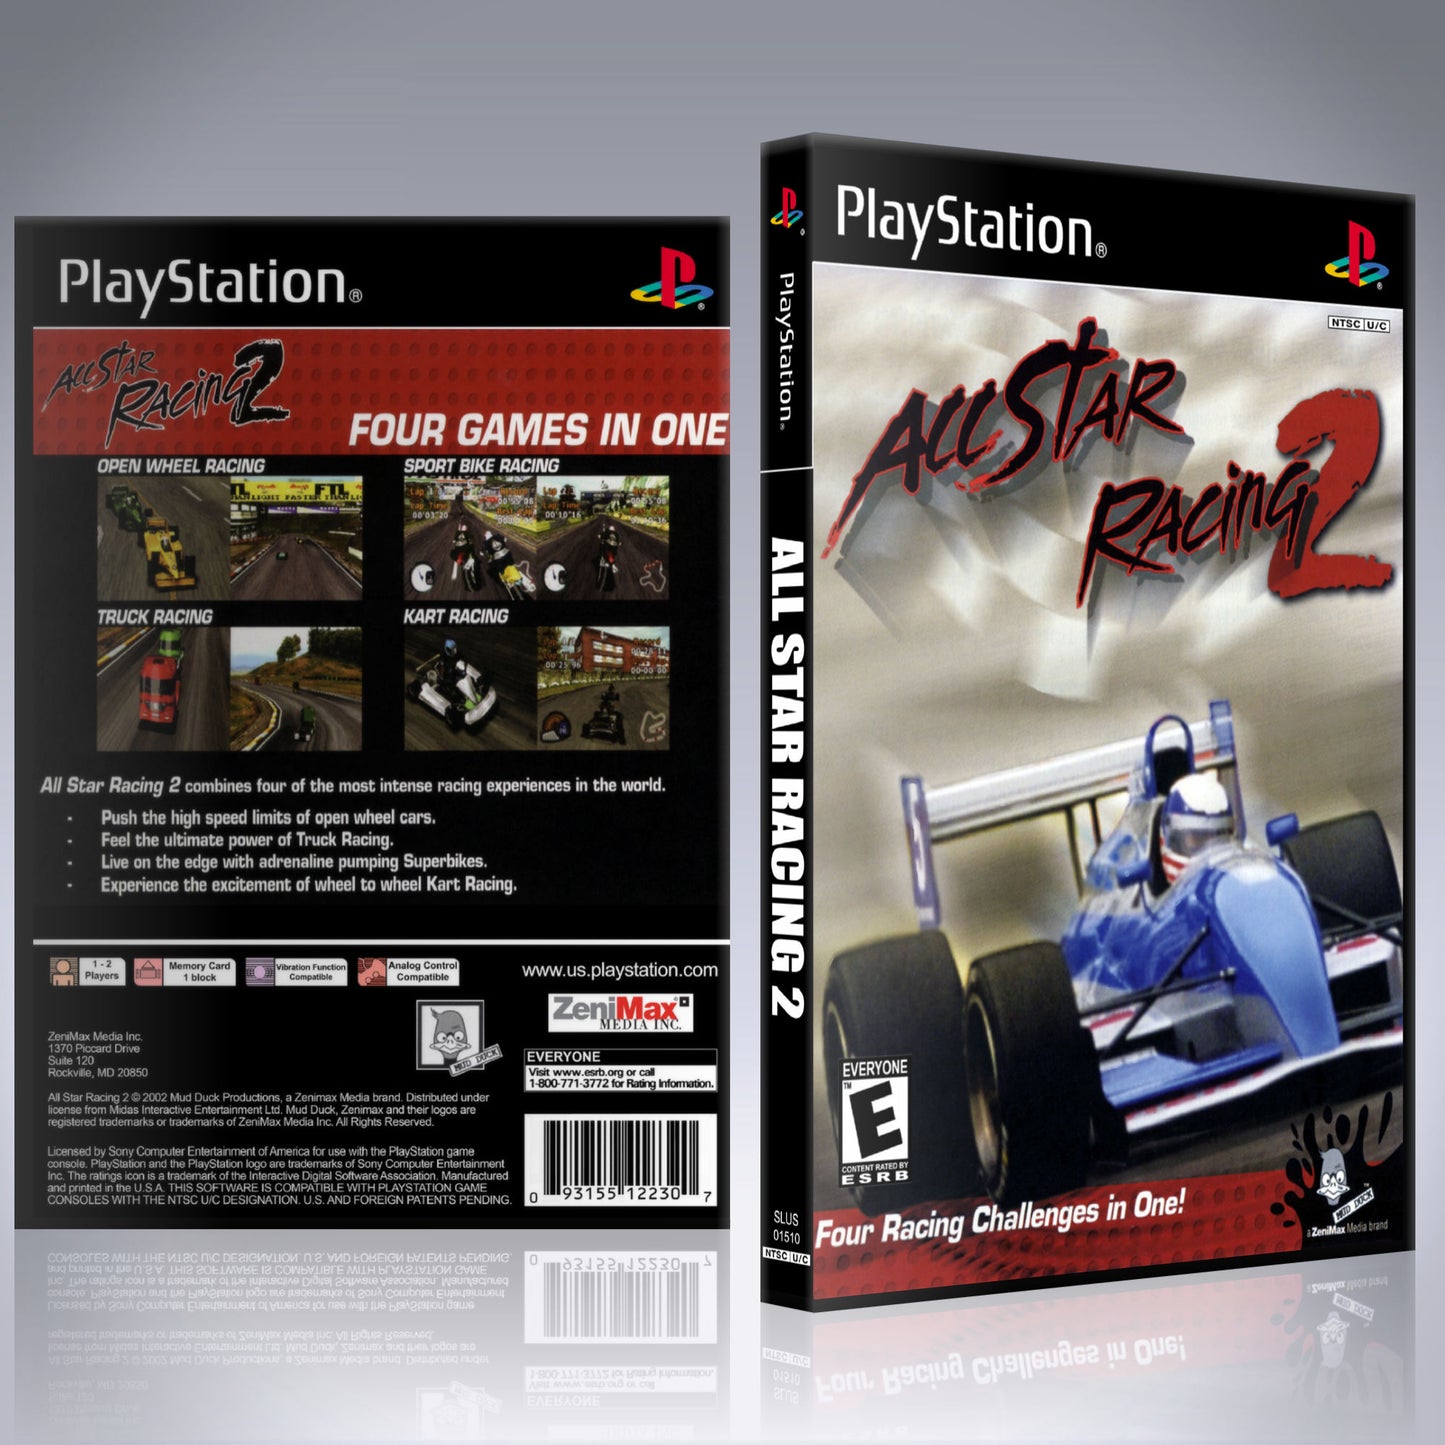 PS1 Case - NO GAME - All Star Racing 2